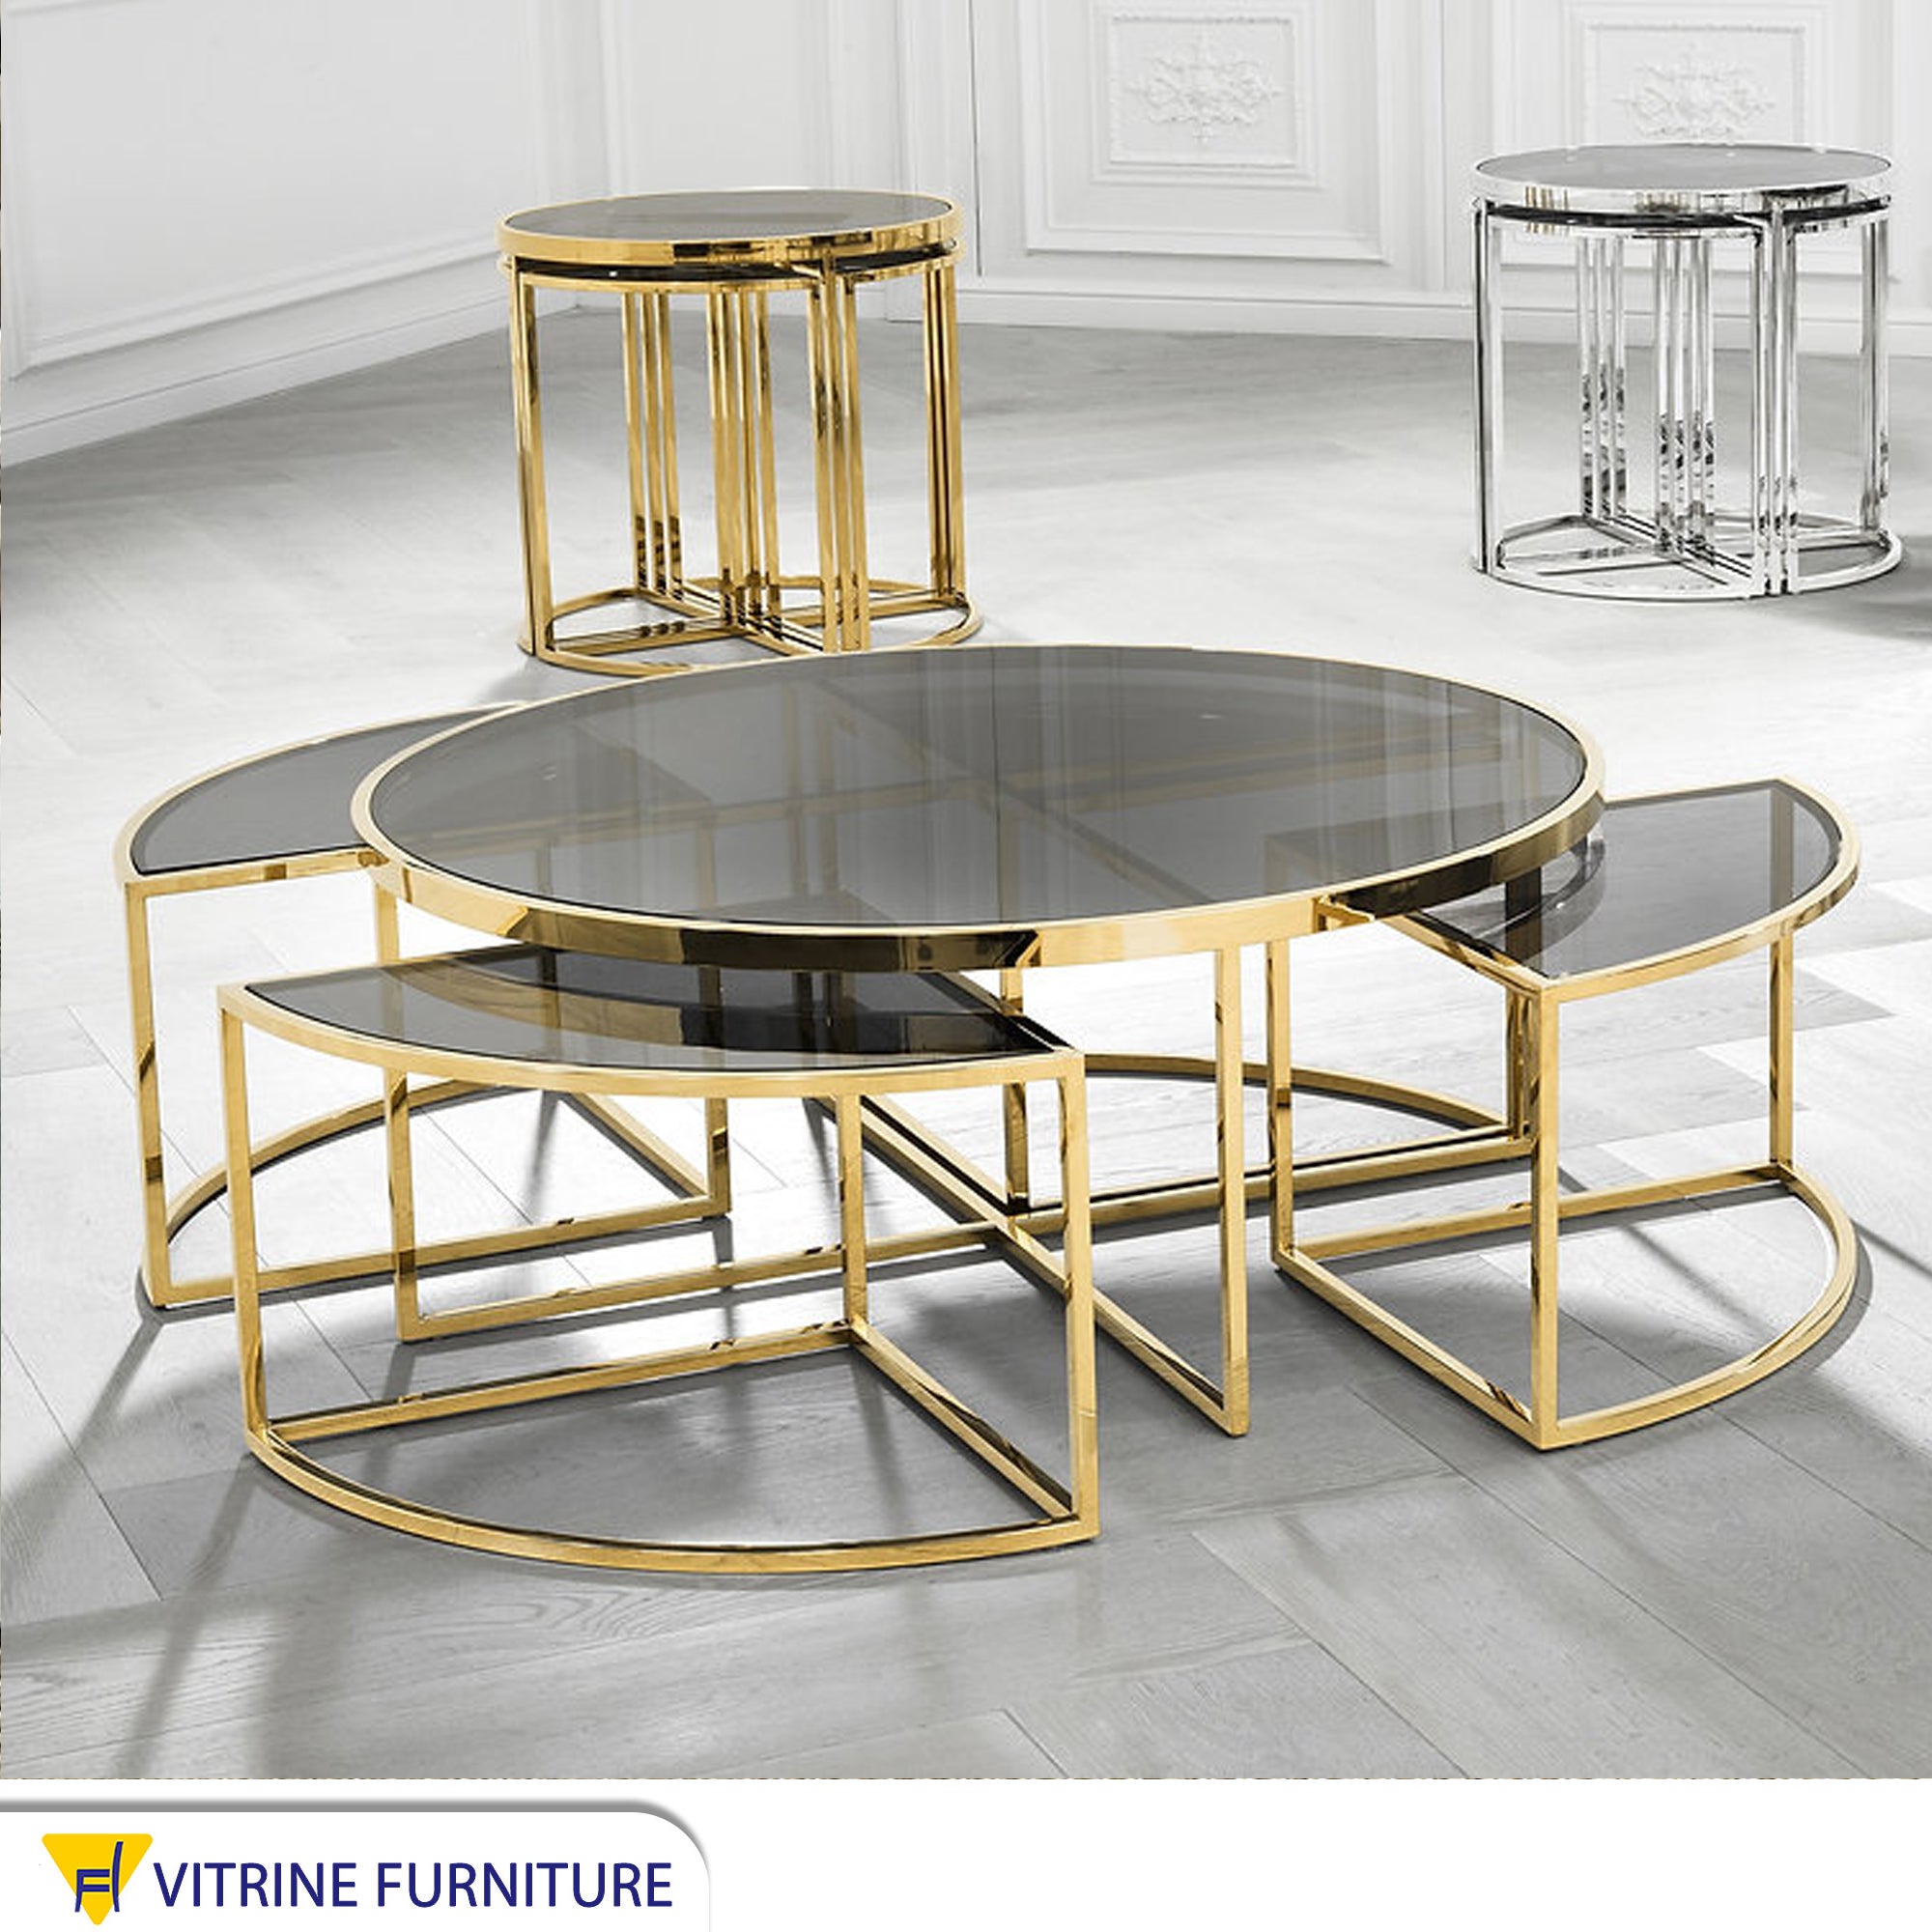 A set of tables with a modern design in golden color